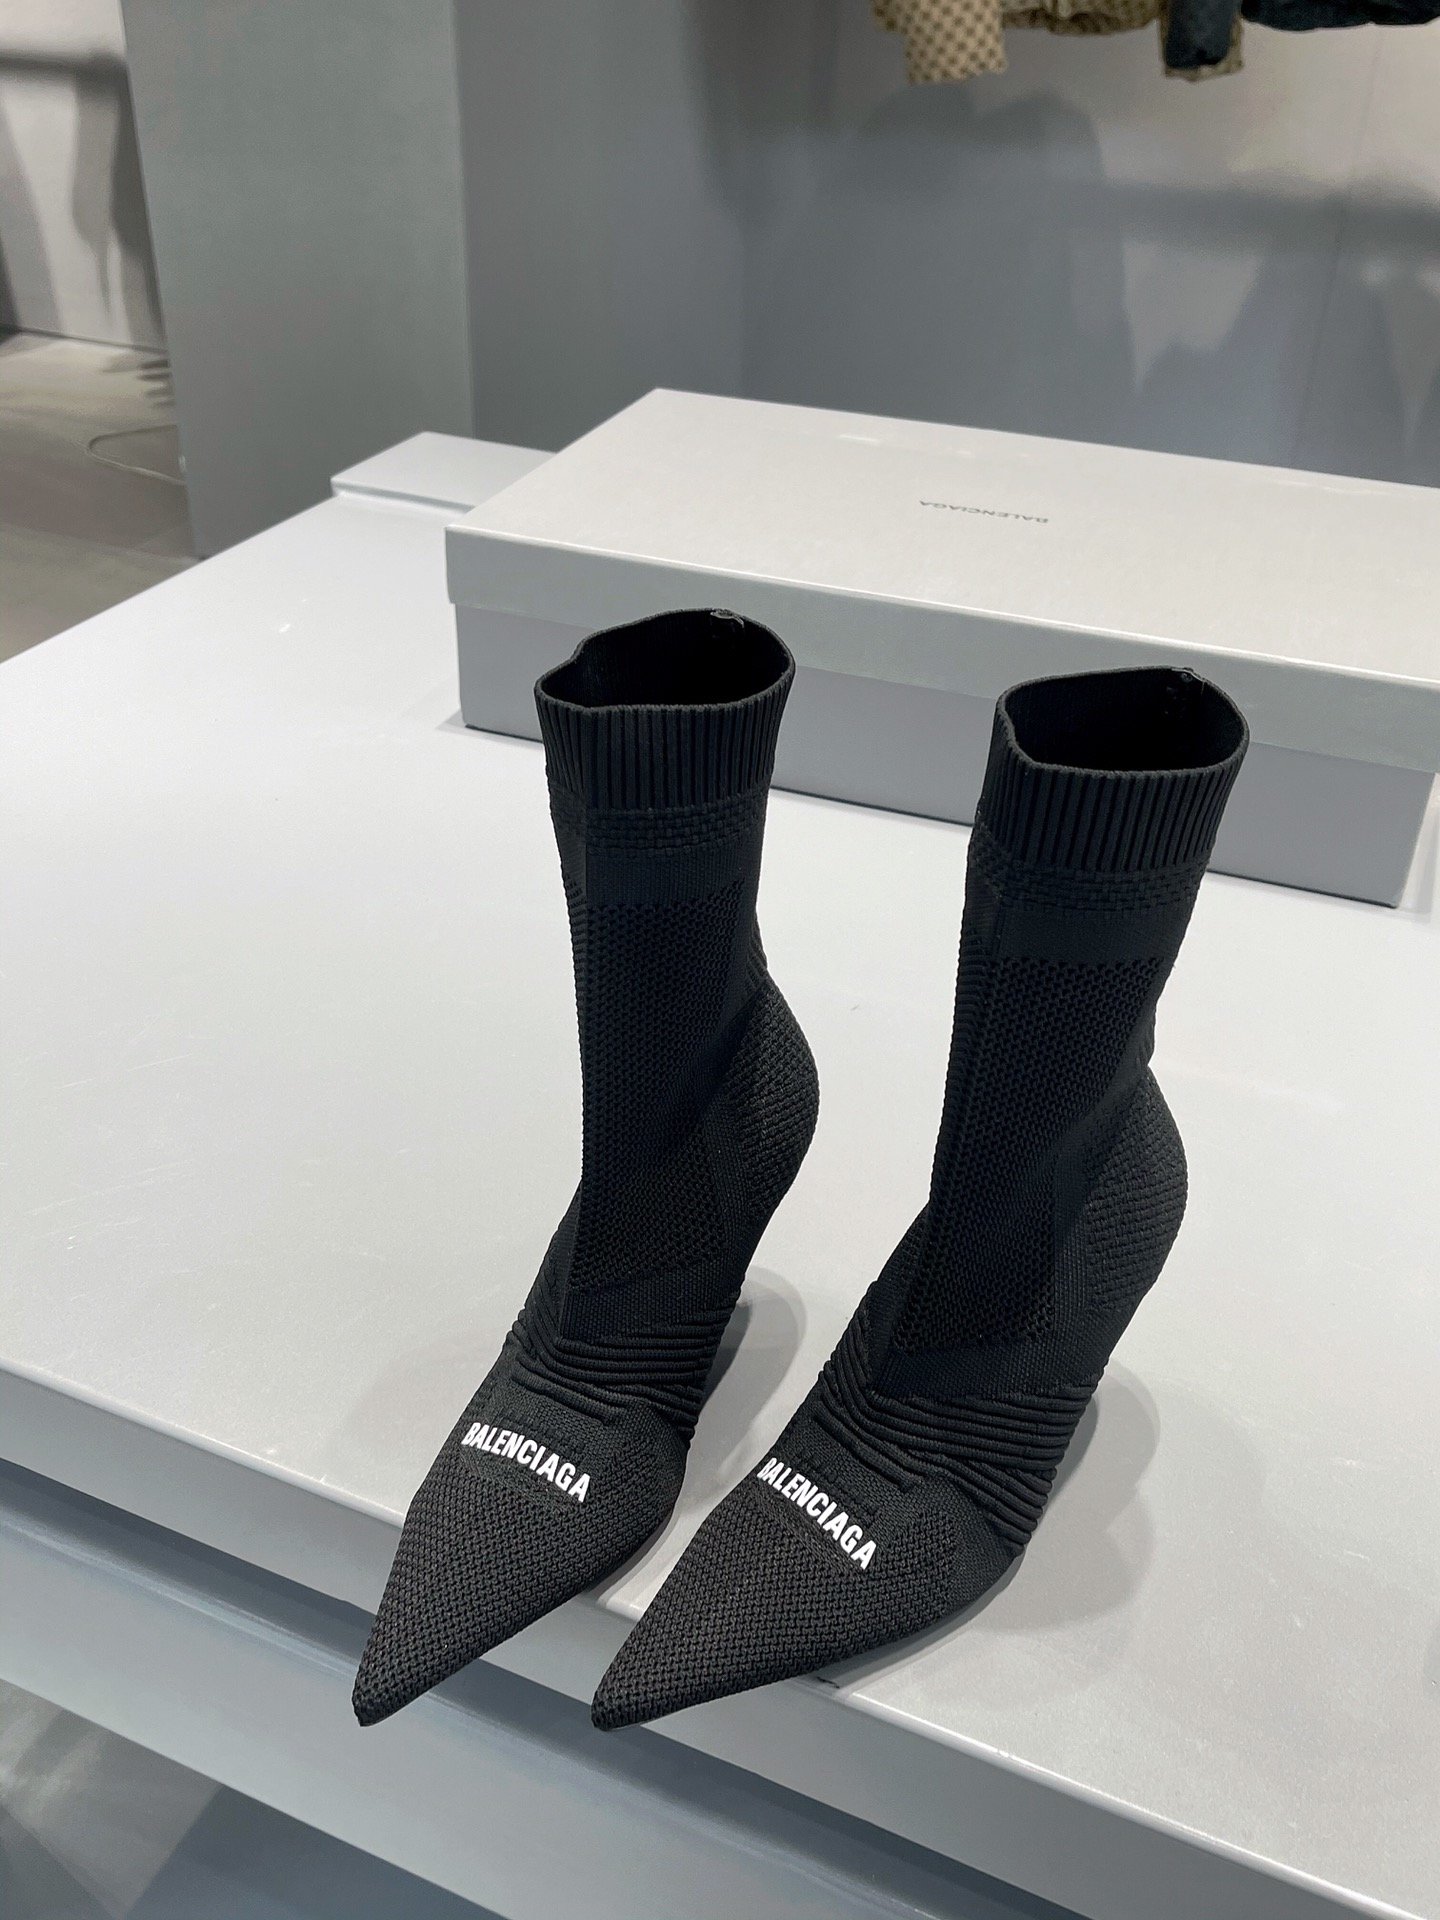 Boots knitted BALENCIAGA KNIFE from sharp the toe